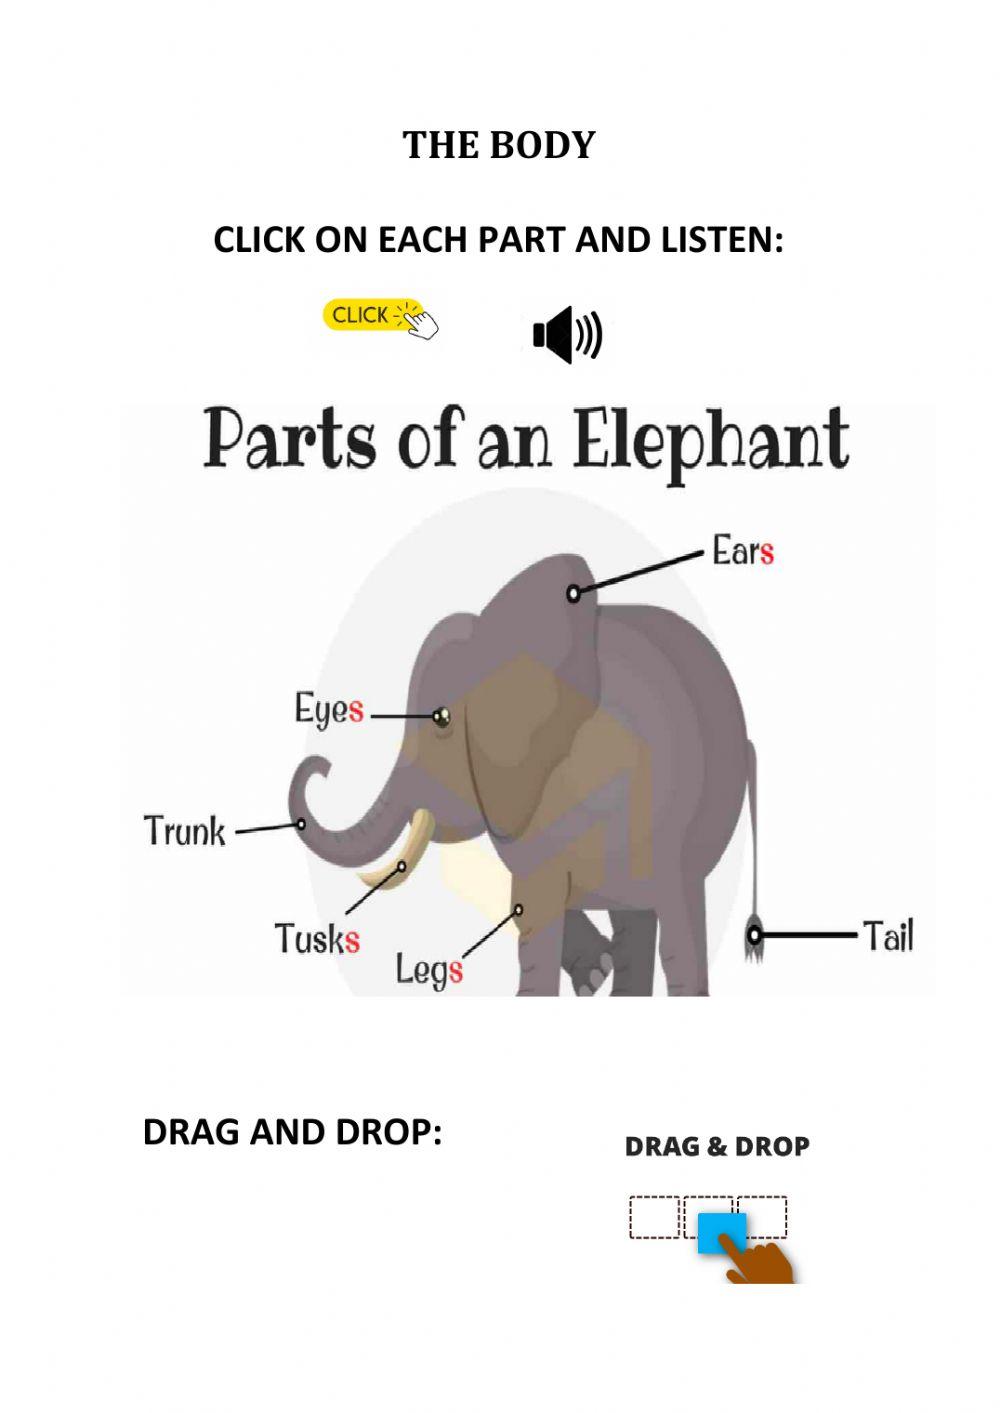 Parts of the elephant